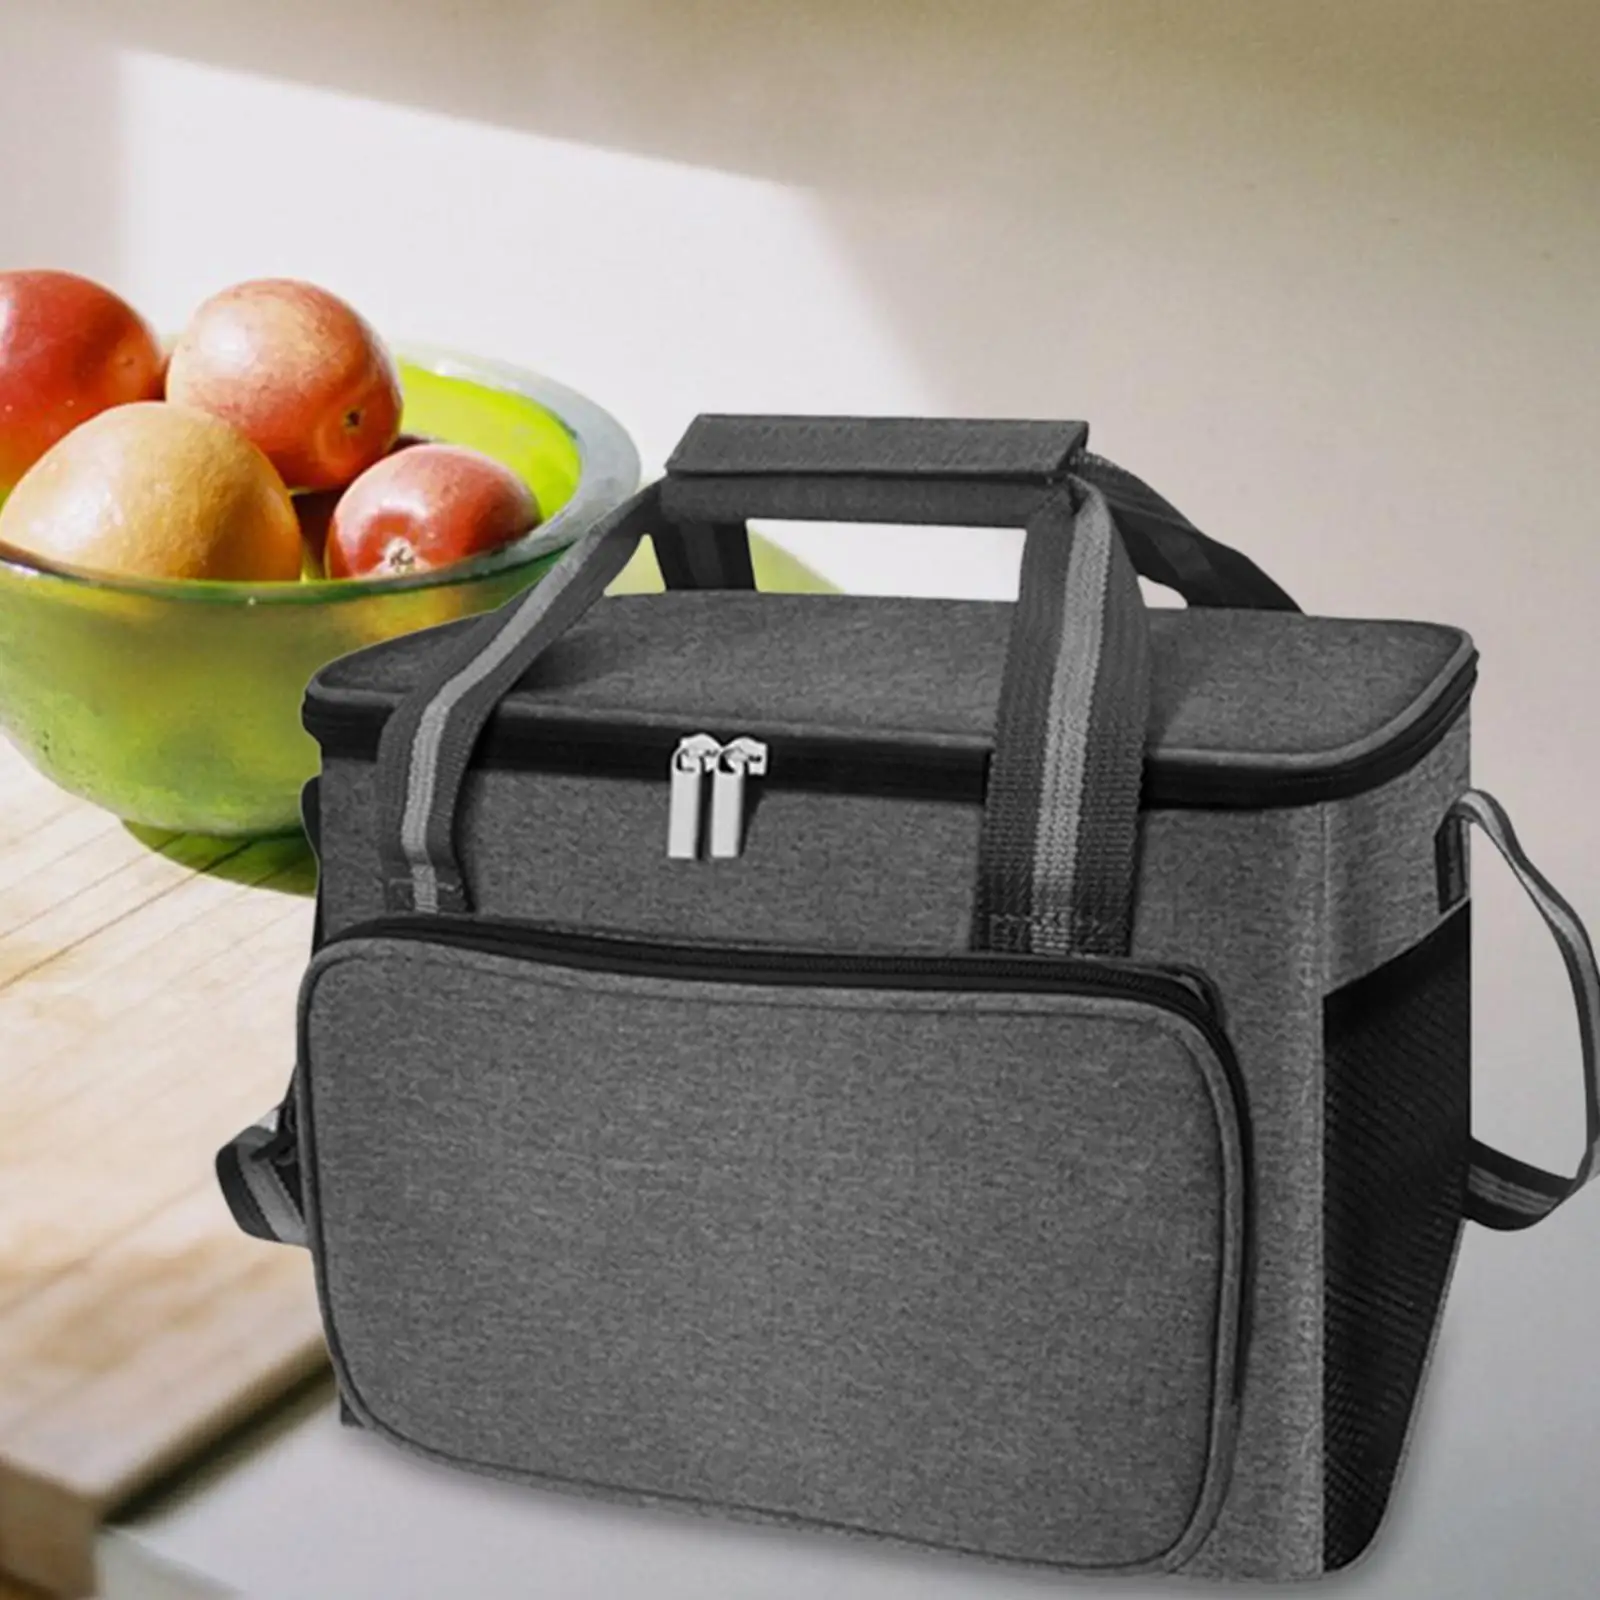 Insulated Lunch Bag Multi Pocket Waterproof Oxford Cloth Zipper Grocery Shopping Bag for Hiking Outdoor Picnic Woman and Man